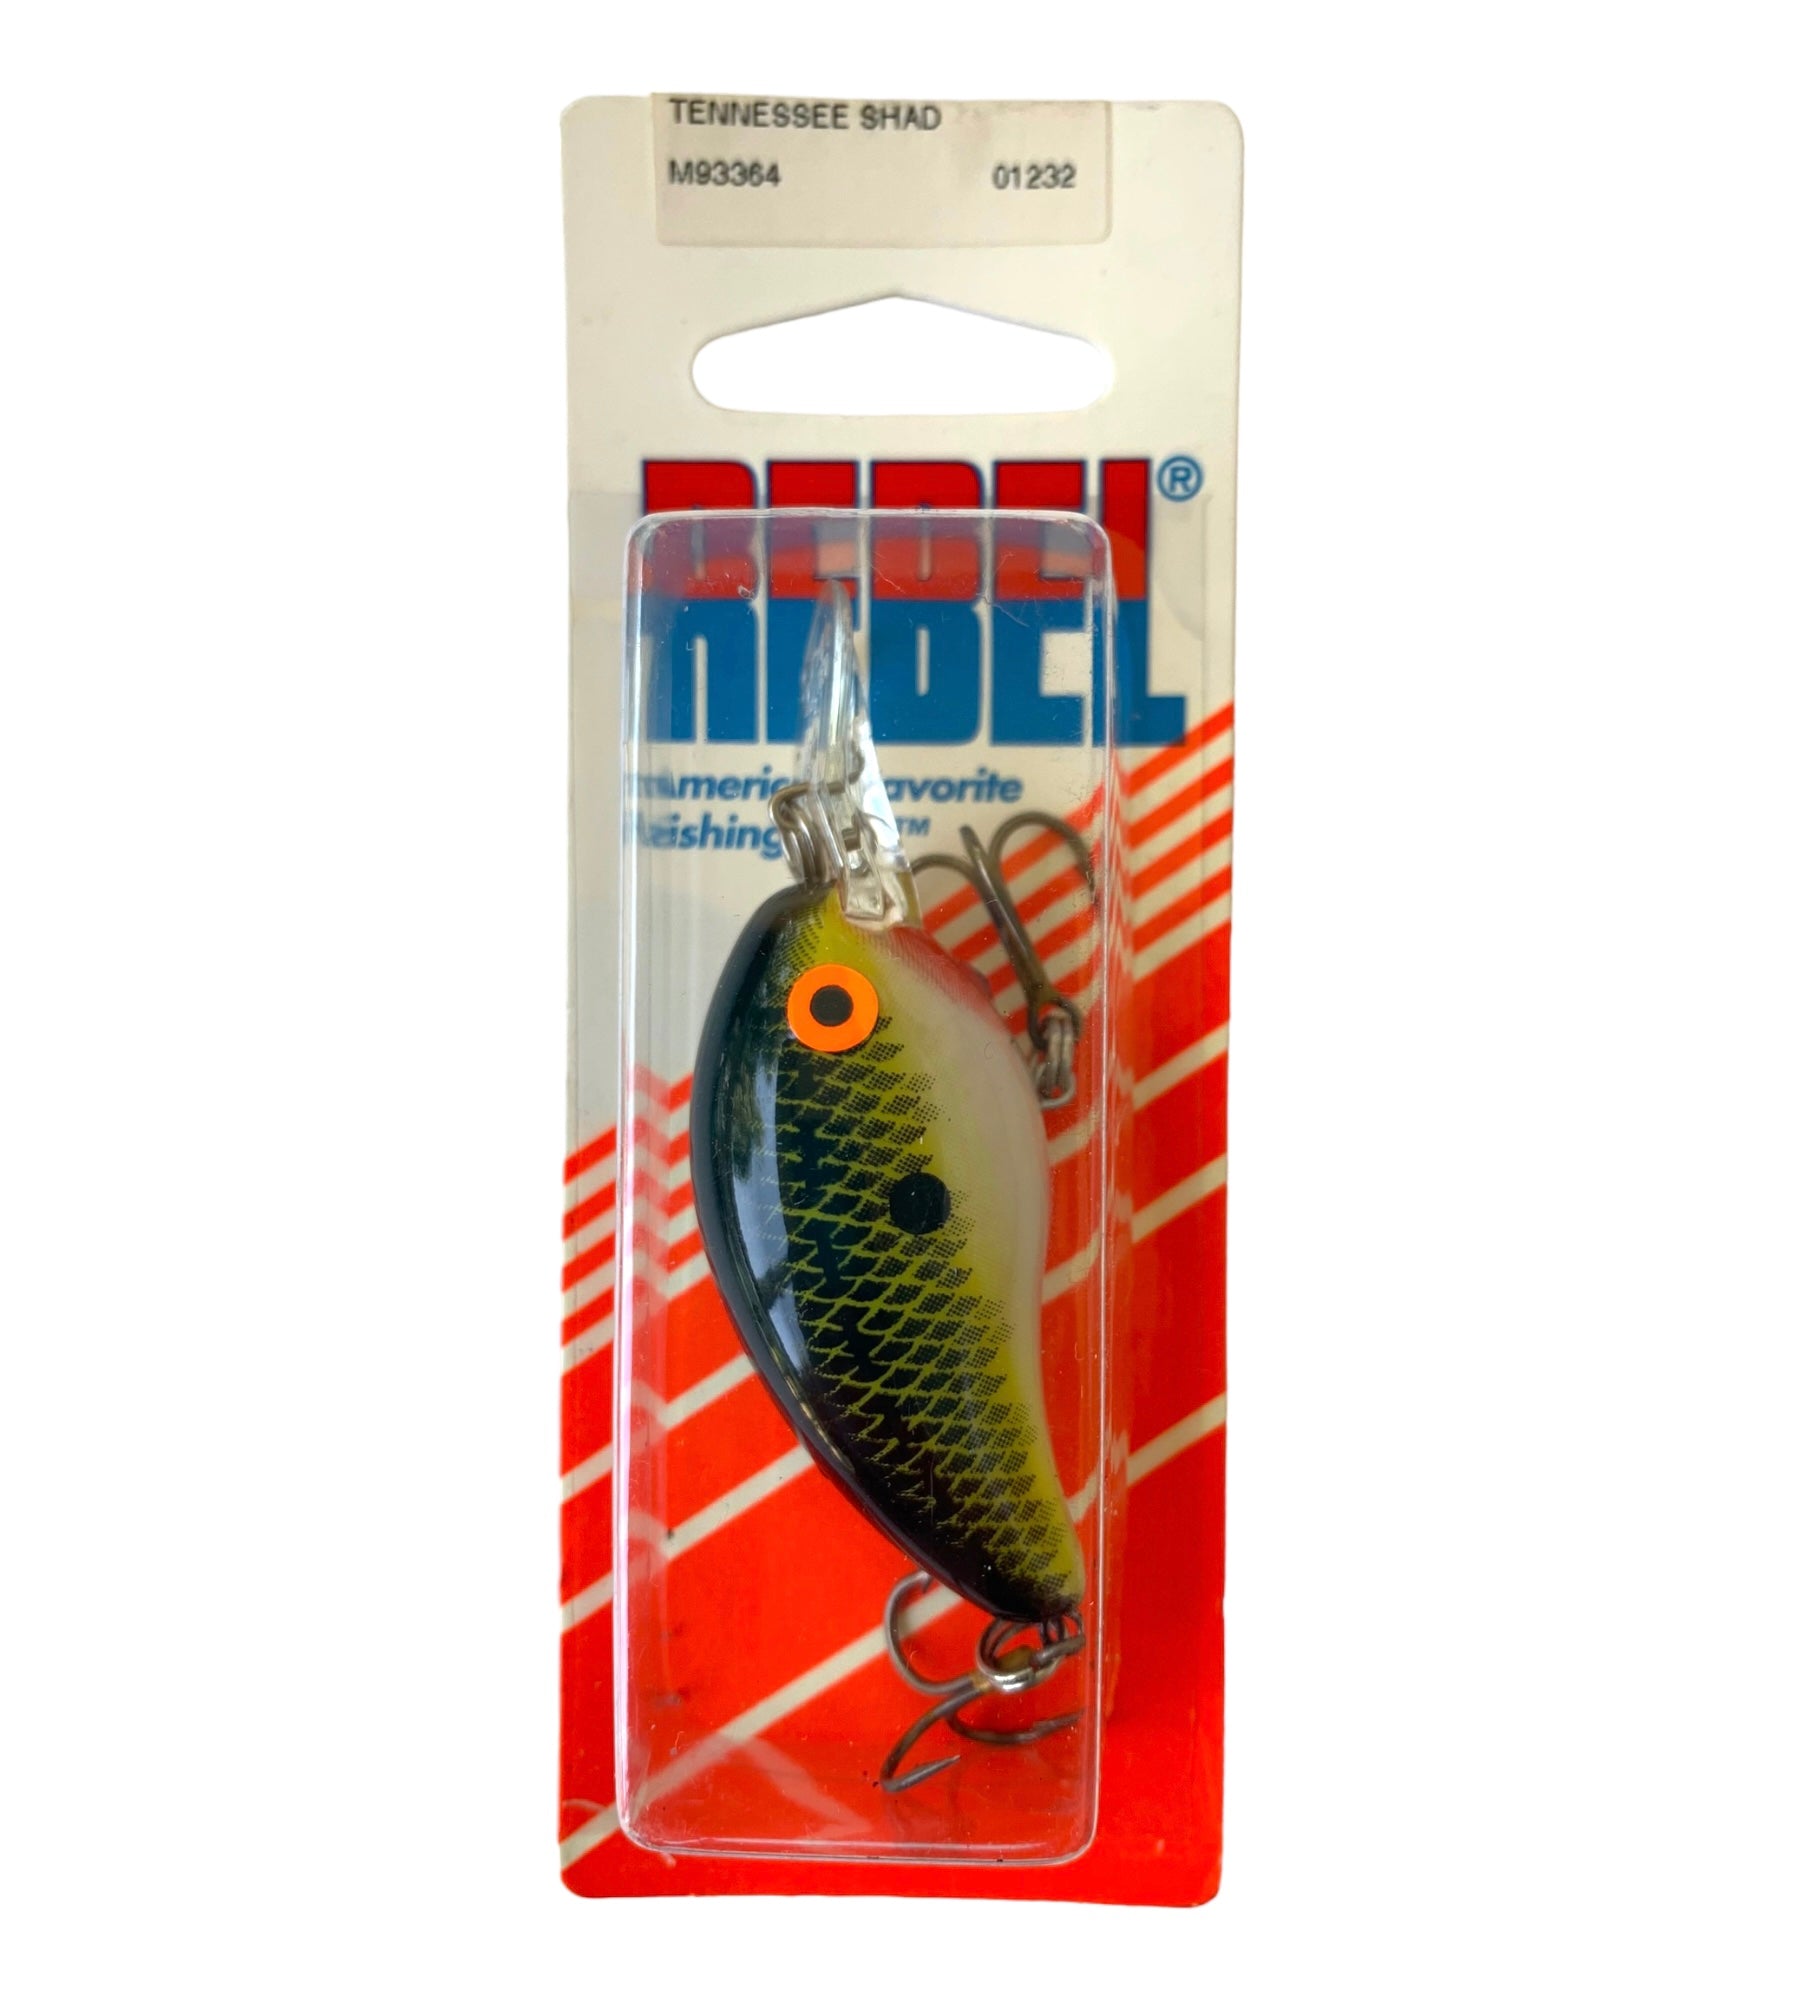 REBEL LURES Mid WEE R Fishing Lure • TENNESSEE SHAD – Toad Tackle